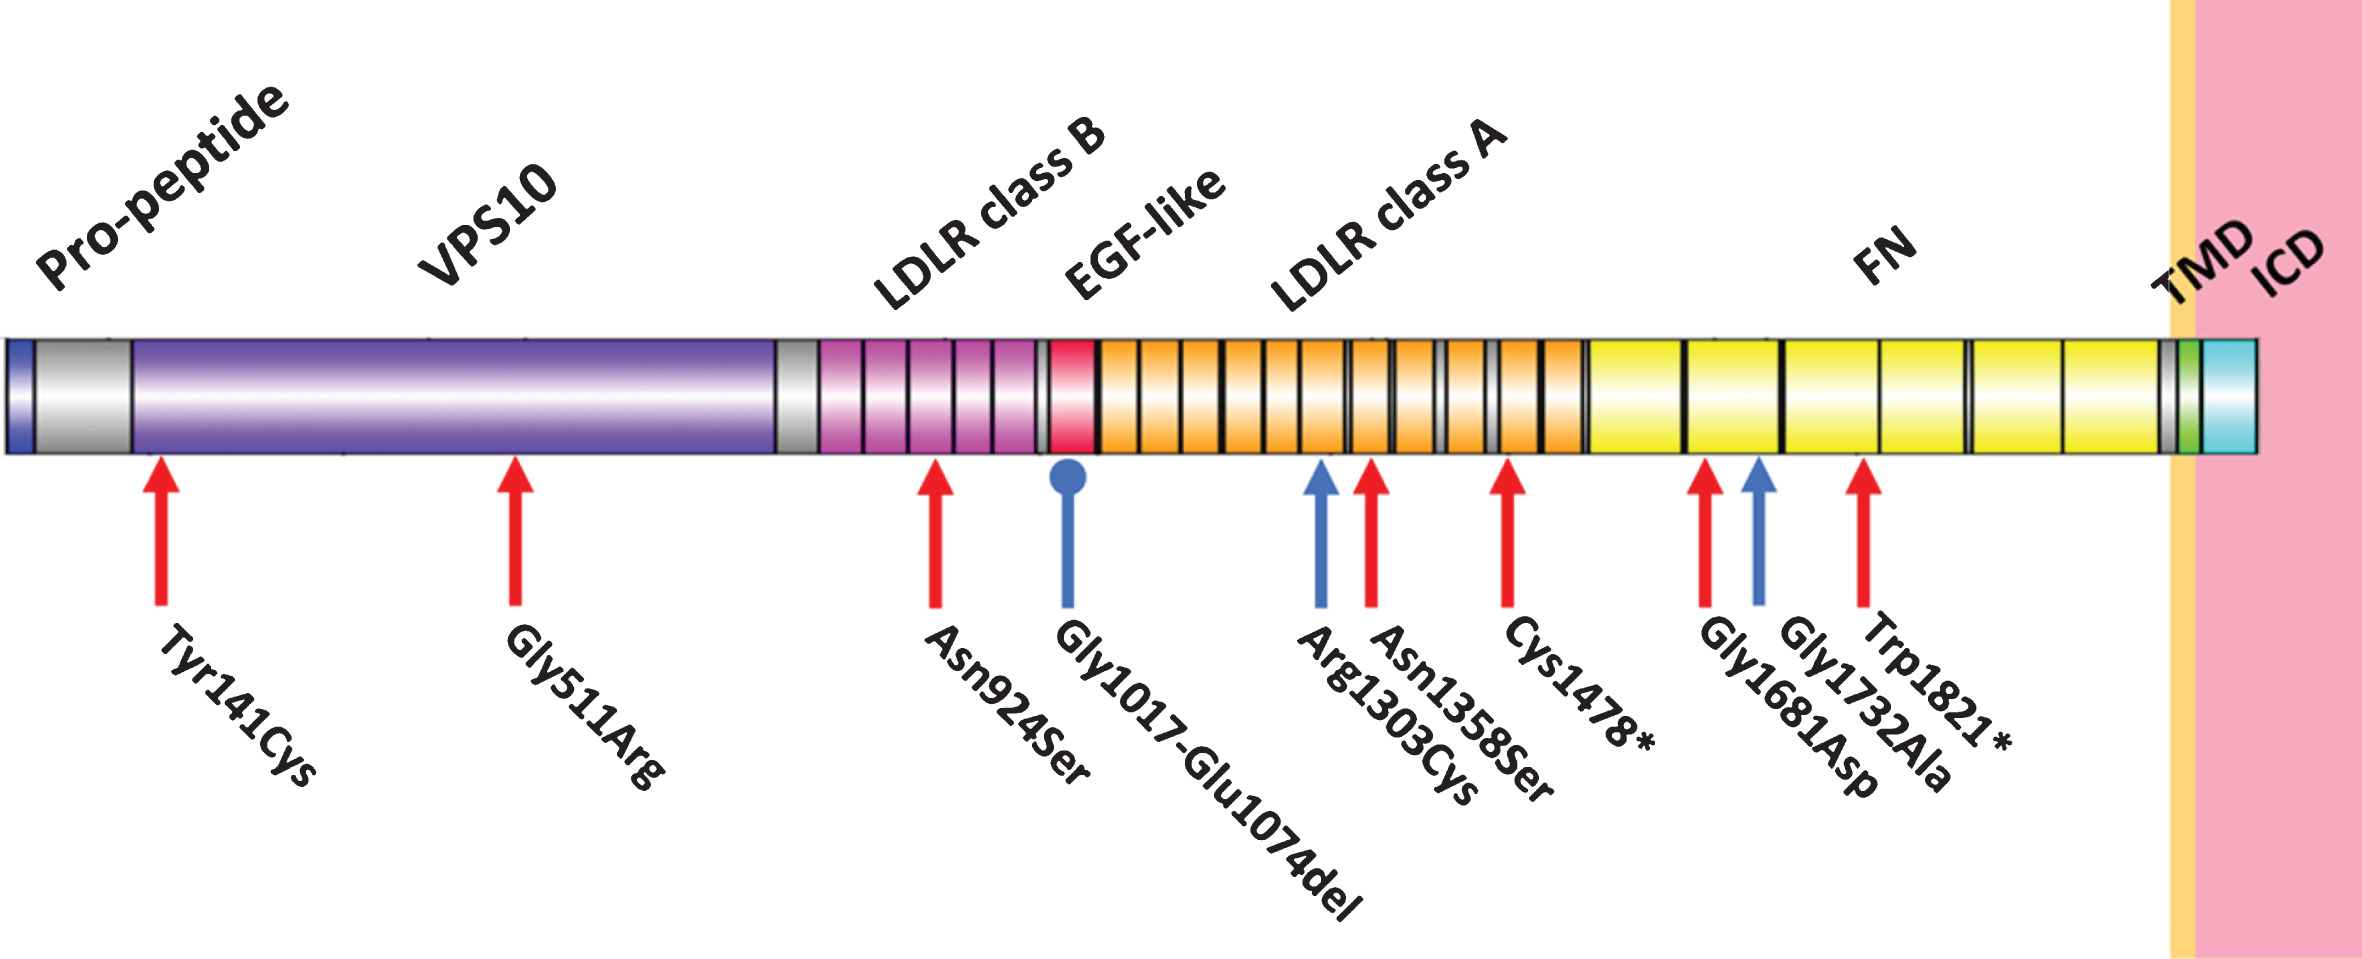 EOfAD variants in SORL1. Figure 3 depicts a schematic of the SORL1 full length protein, indicating the sites for early-onset, familial Alzheimer’s disease (EOfAD) variants for which pedigrees have been published to date. Red arrows indicate variants published in [18] and blue arrows indicate variants published from [19]. VPS10, vacuolar protein sorting 10; LDLR, low density lipoprotein receptor; EGF, epidermal growth factor; FN, fibronectin-type; TMD, transmembrane domain; ICD, intracellular domain.